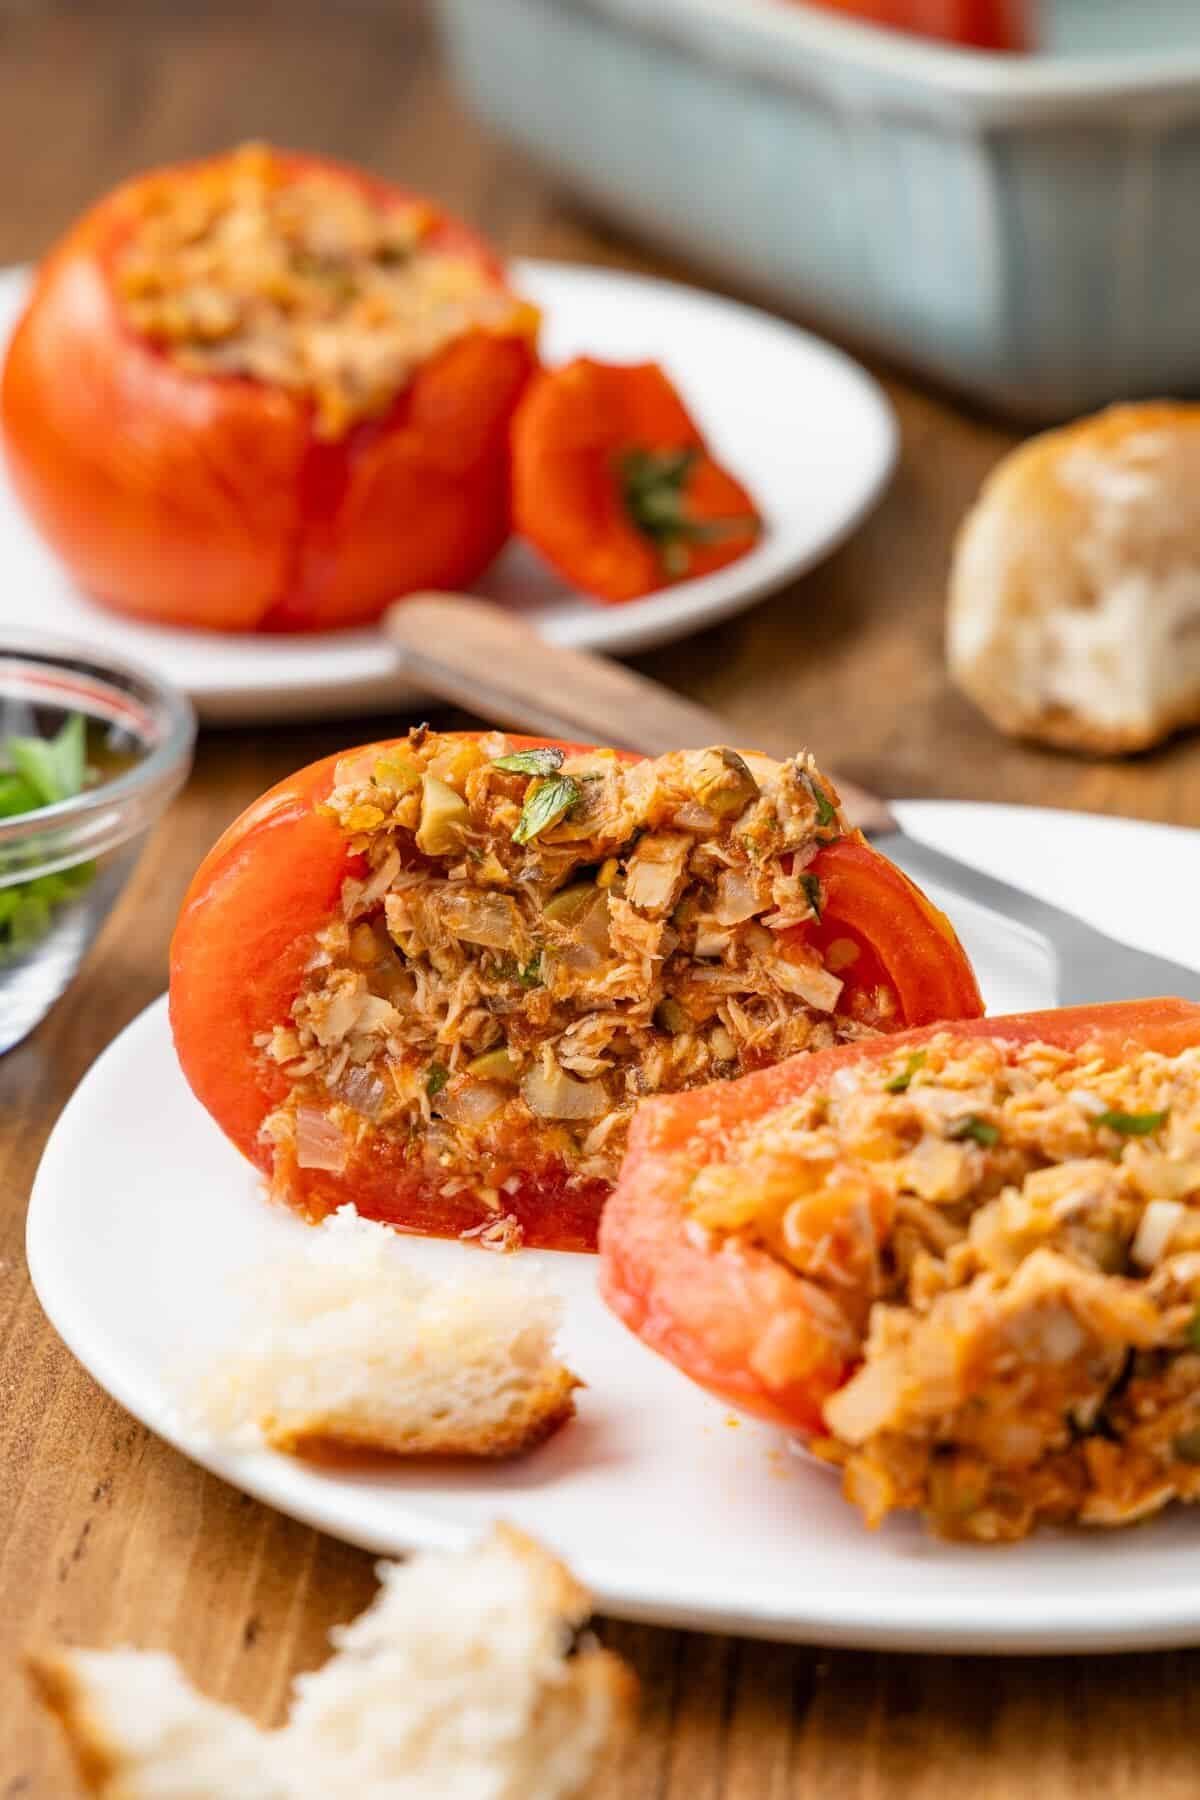 close up of a tomato stuffed with tuna cut in half on a white plate with a fork and a small piece of bread.